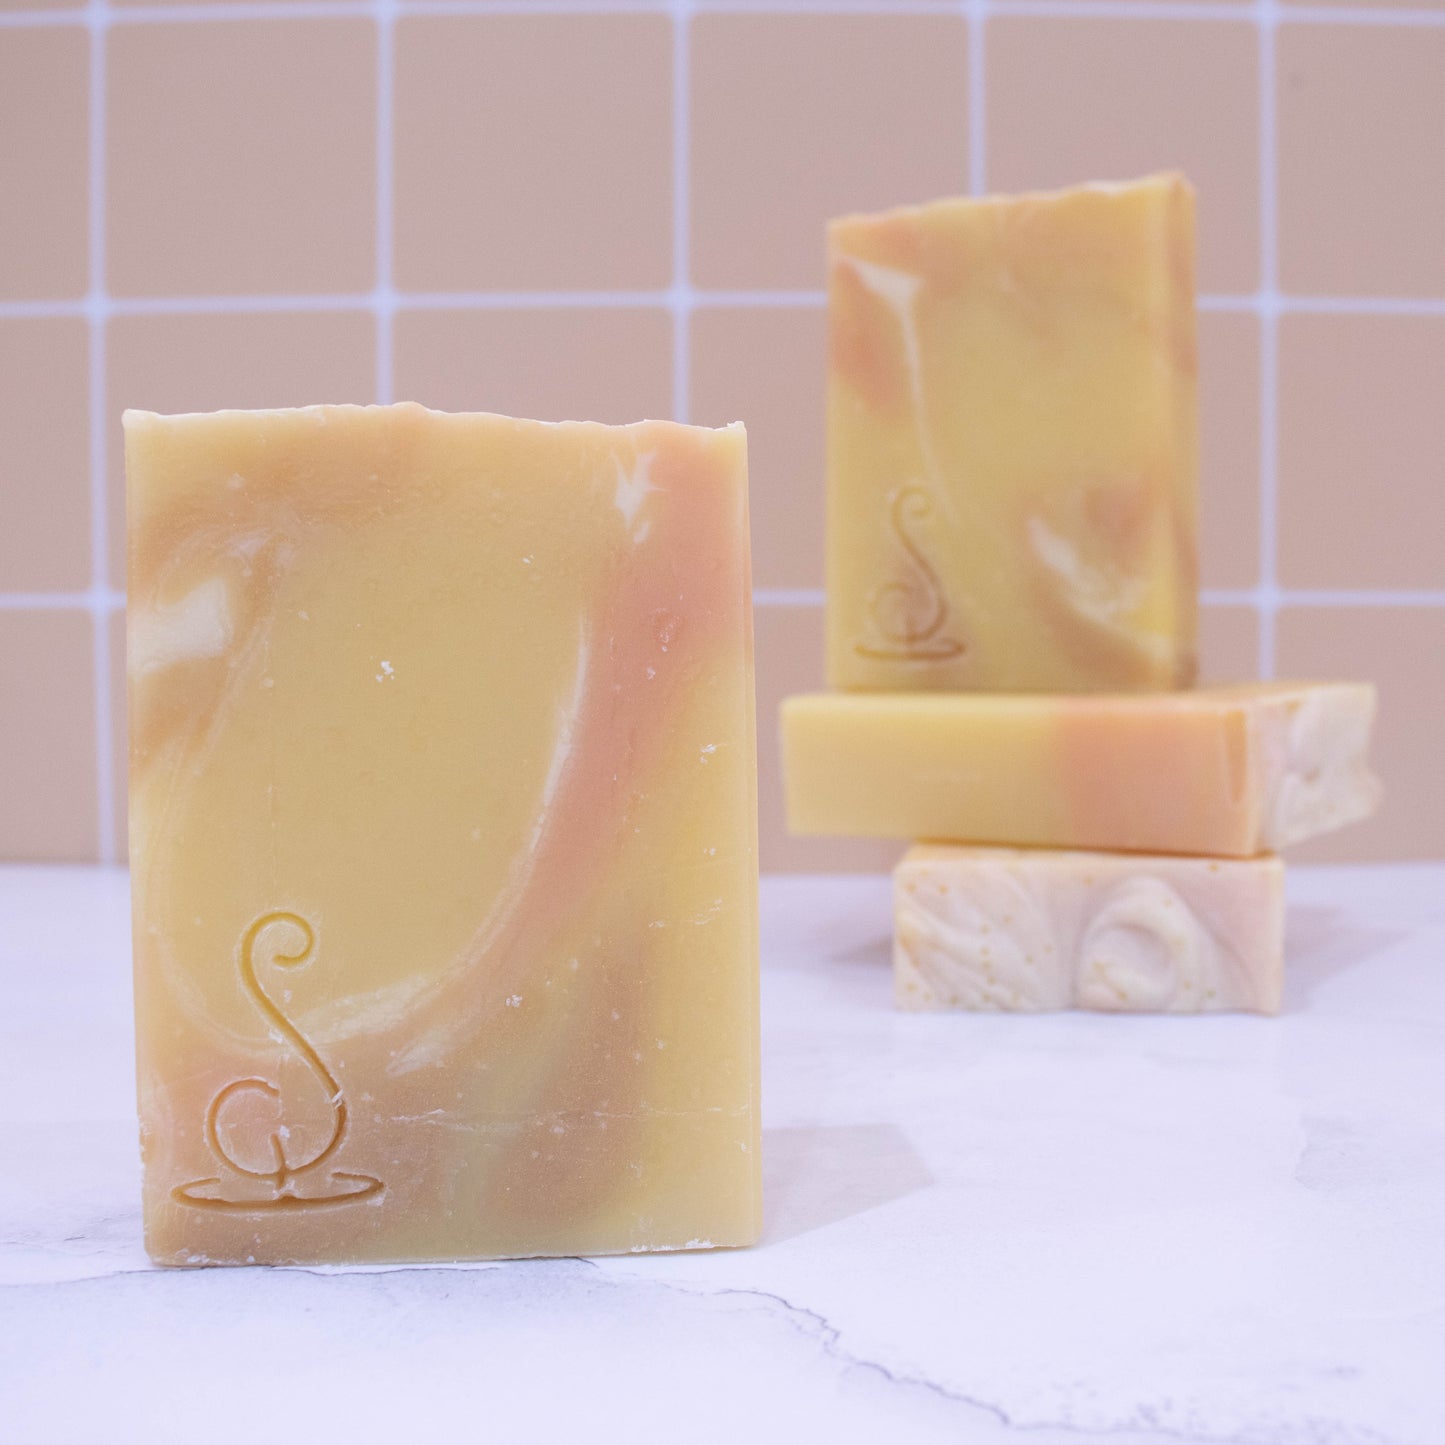 Four rectangular bars of soap sit on a marble bench each showing various design patterns from the same batch of soap. The soaps are a sunshine yellow colour and have streaks of dark gold and white.  All soaps have a similar pattern but all have slight differences